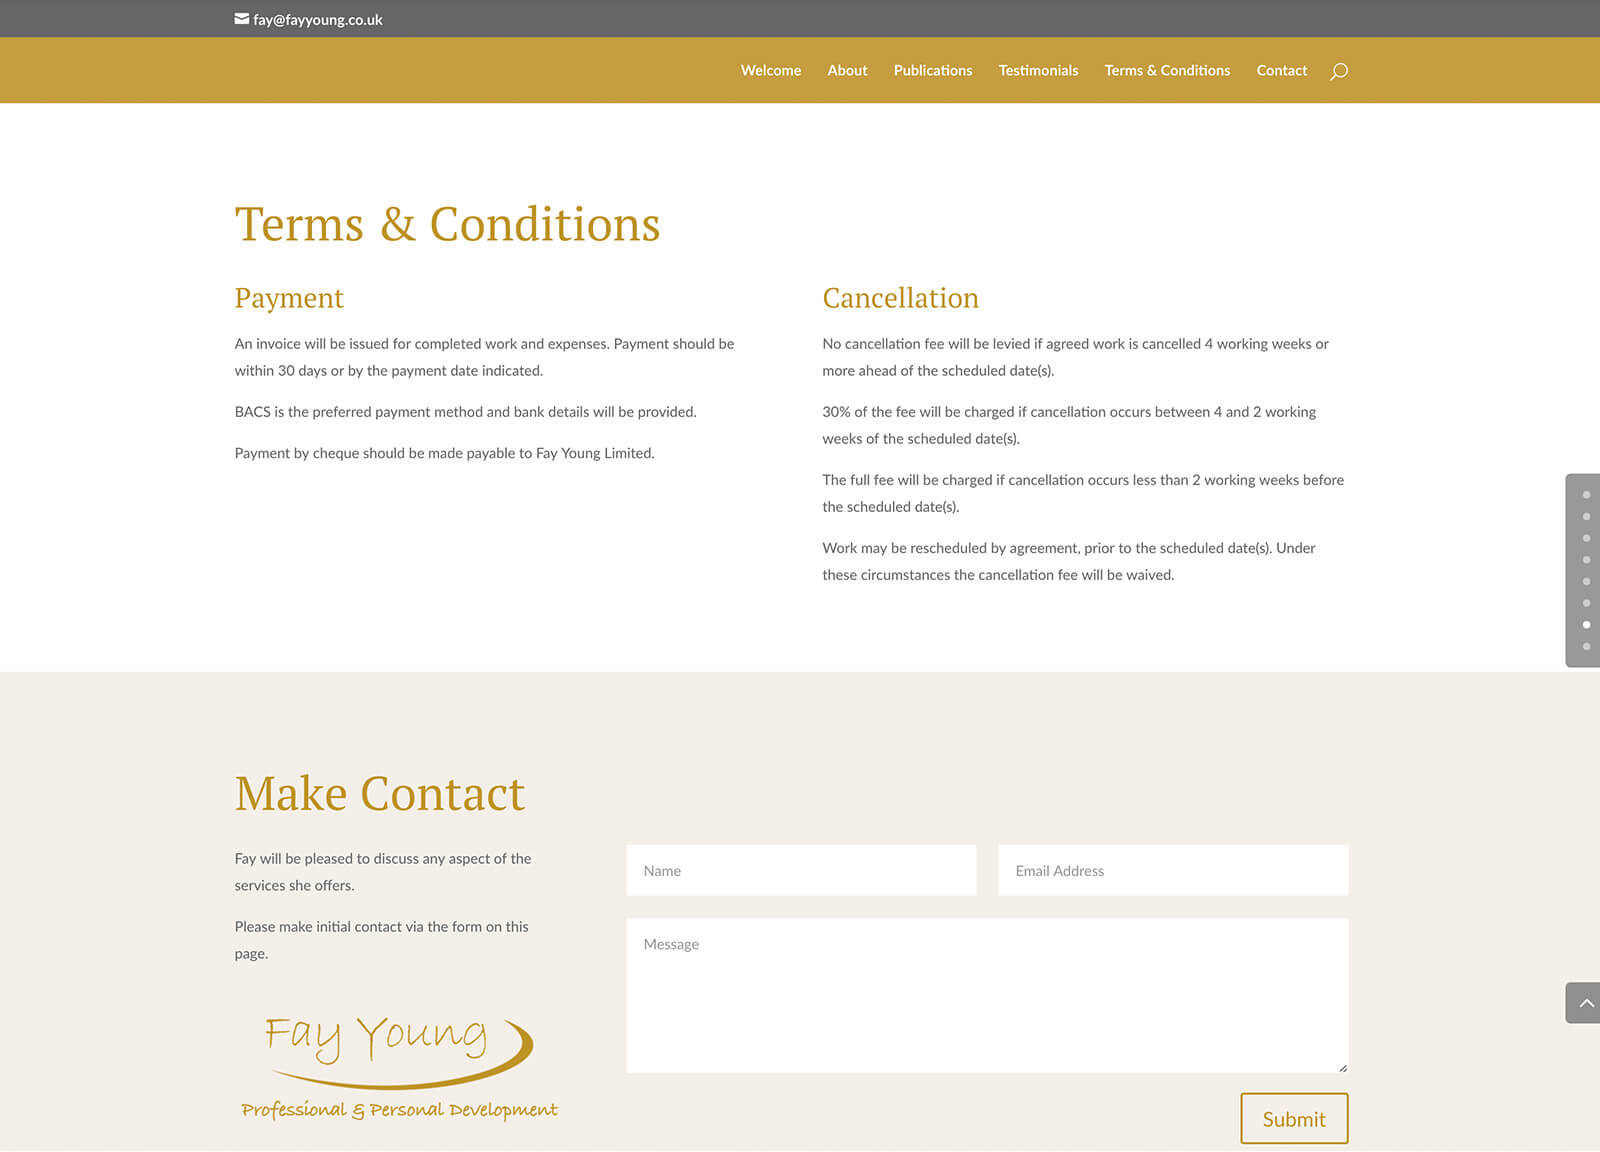 Quick website design for local self-employed consultant website: Contact section